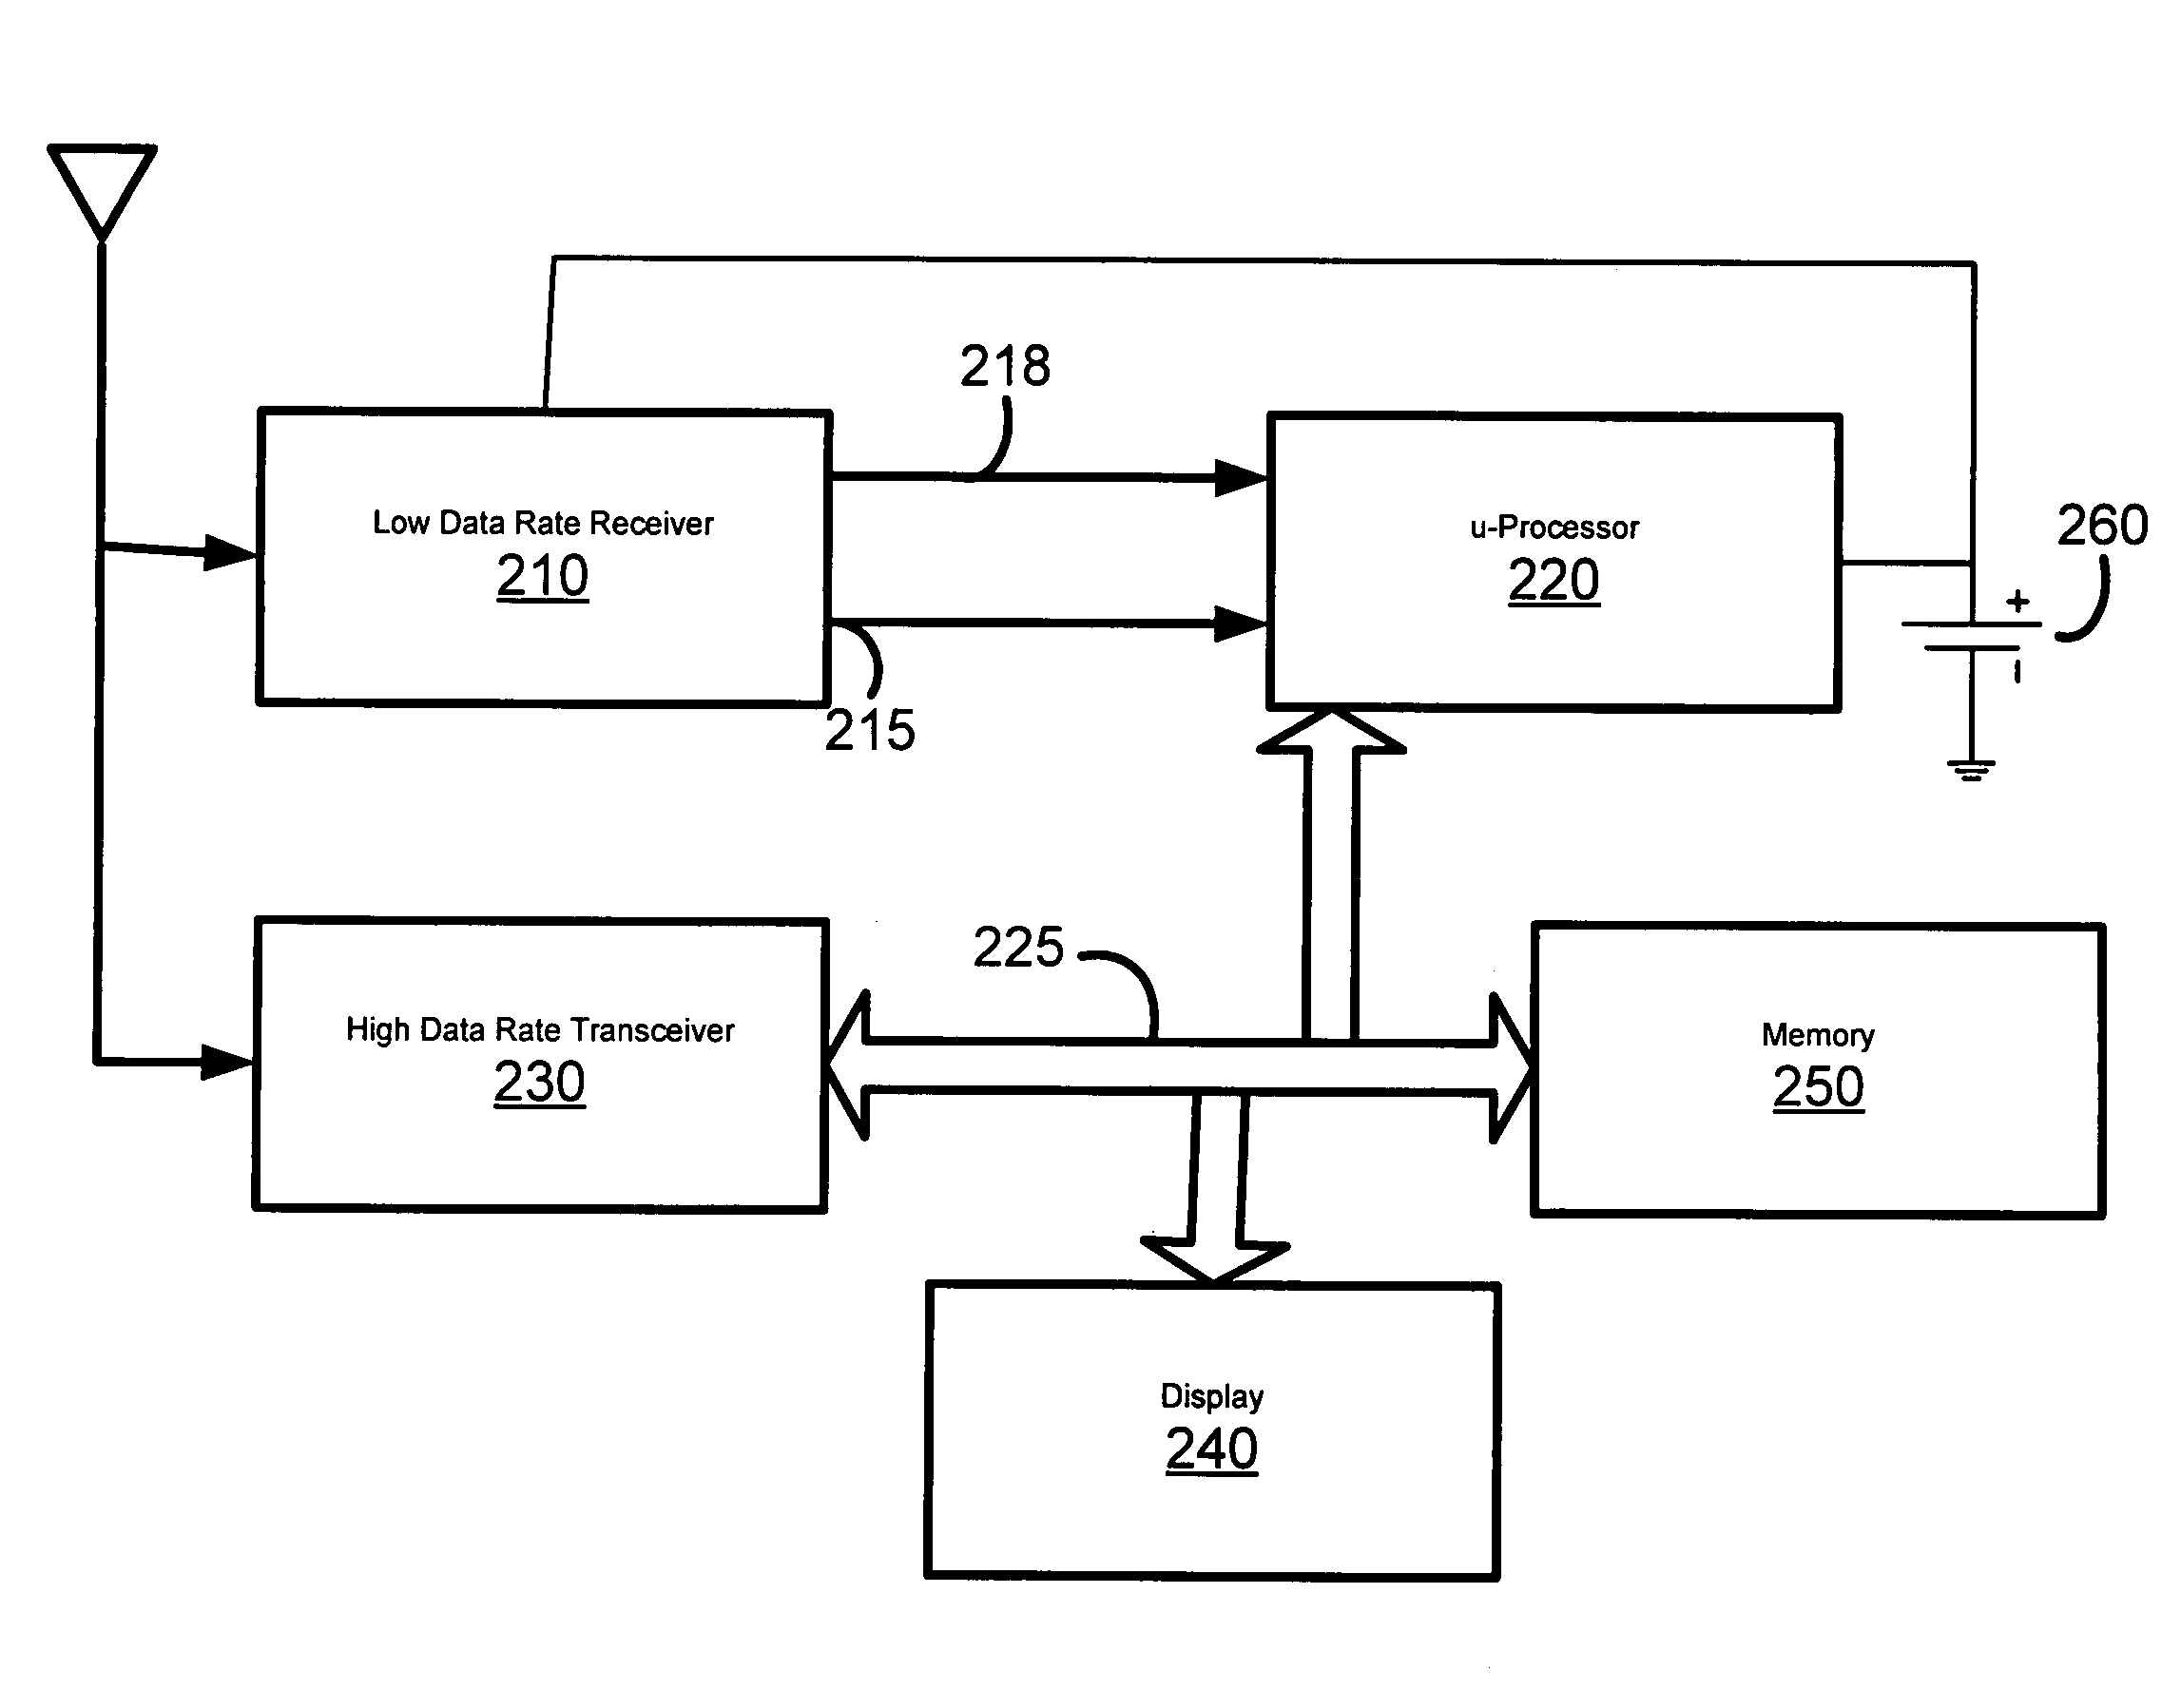 Apparatus and methods for communicating with a low duty cycle wireless device